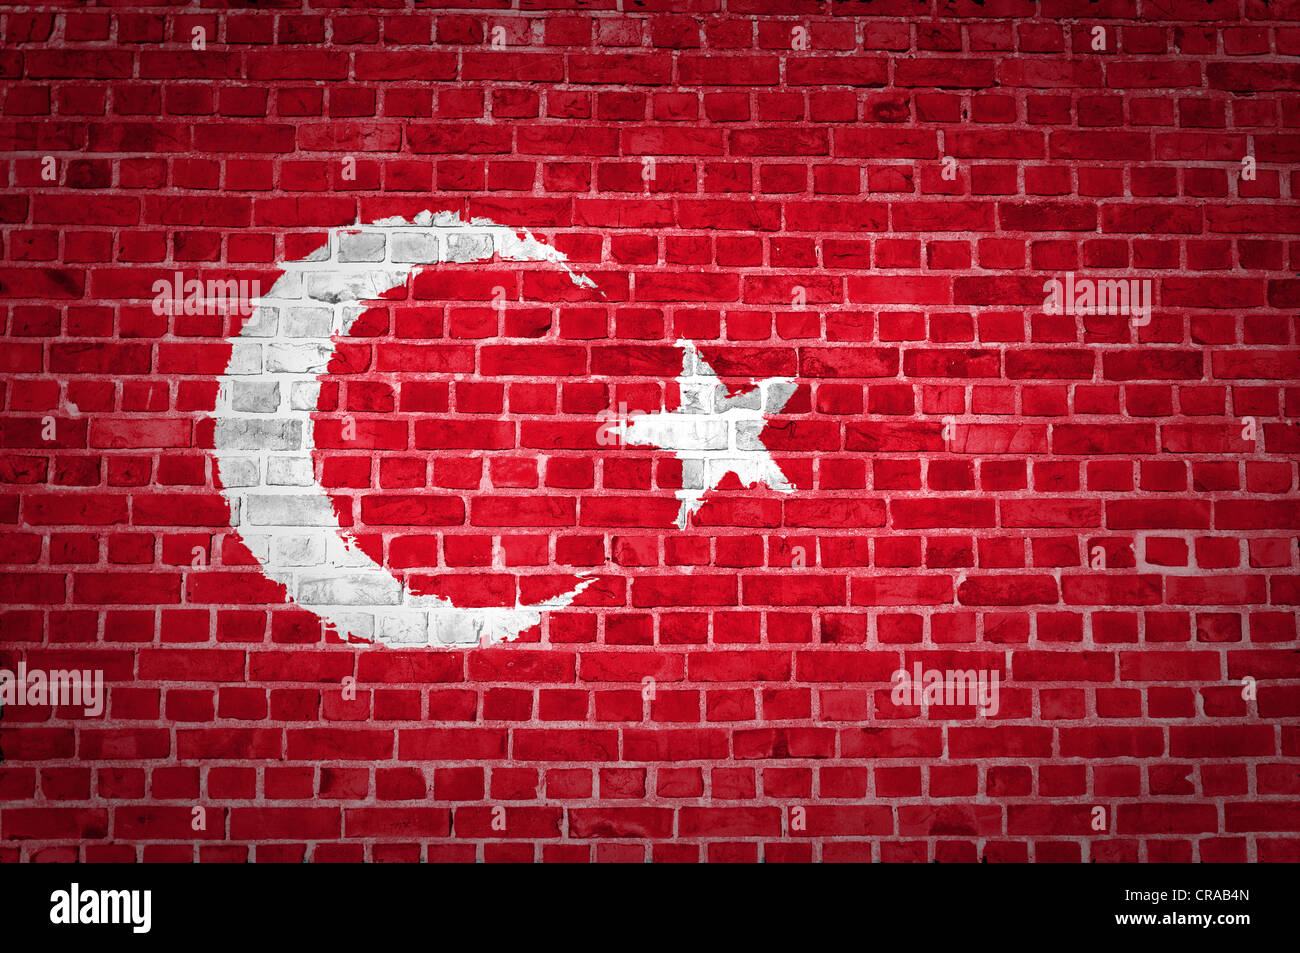 An image of the Turkey flag painted on a brick wall in an urban location Stock Photo